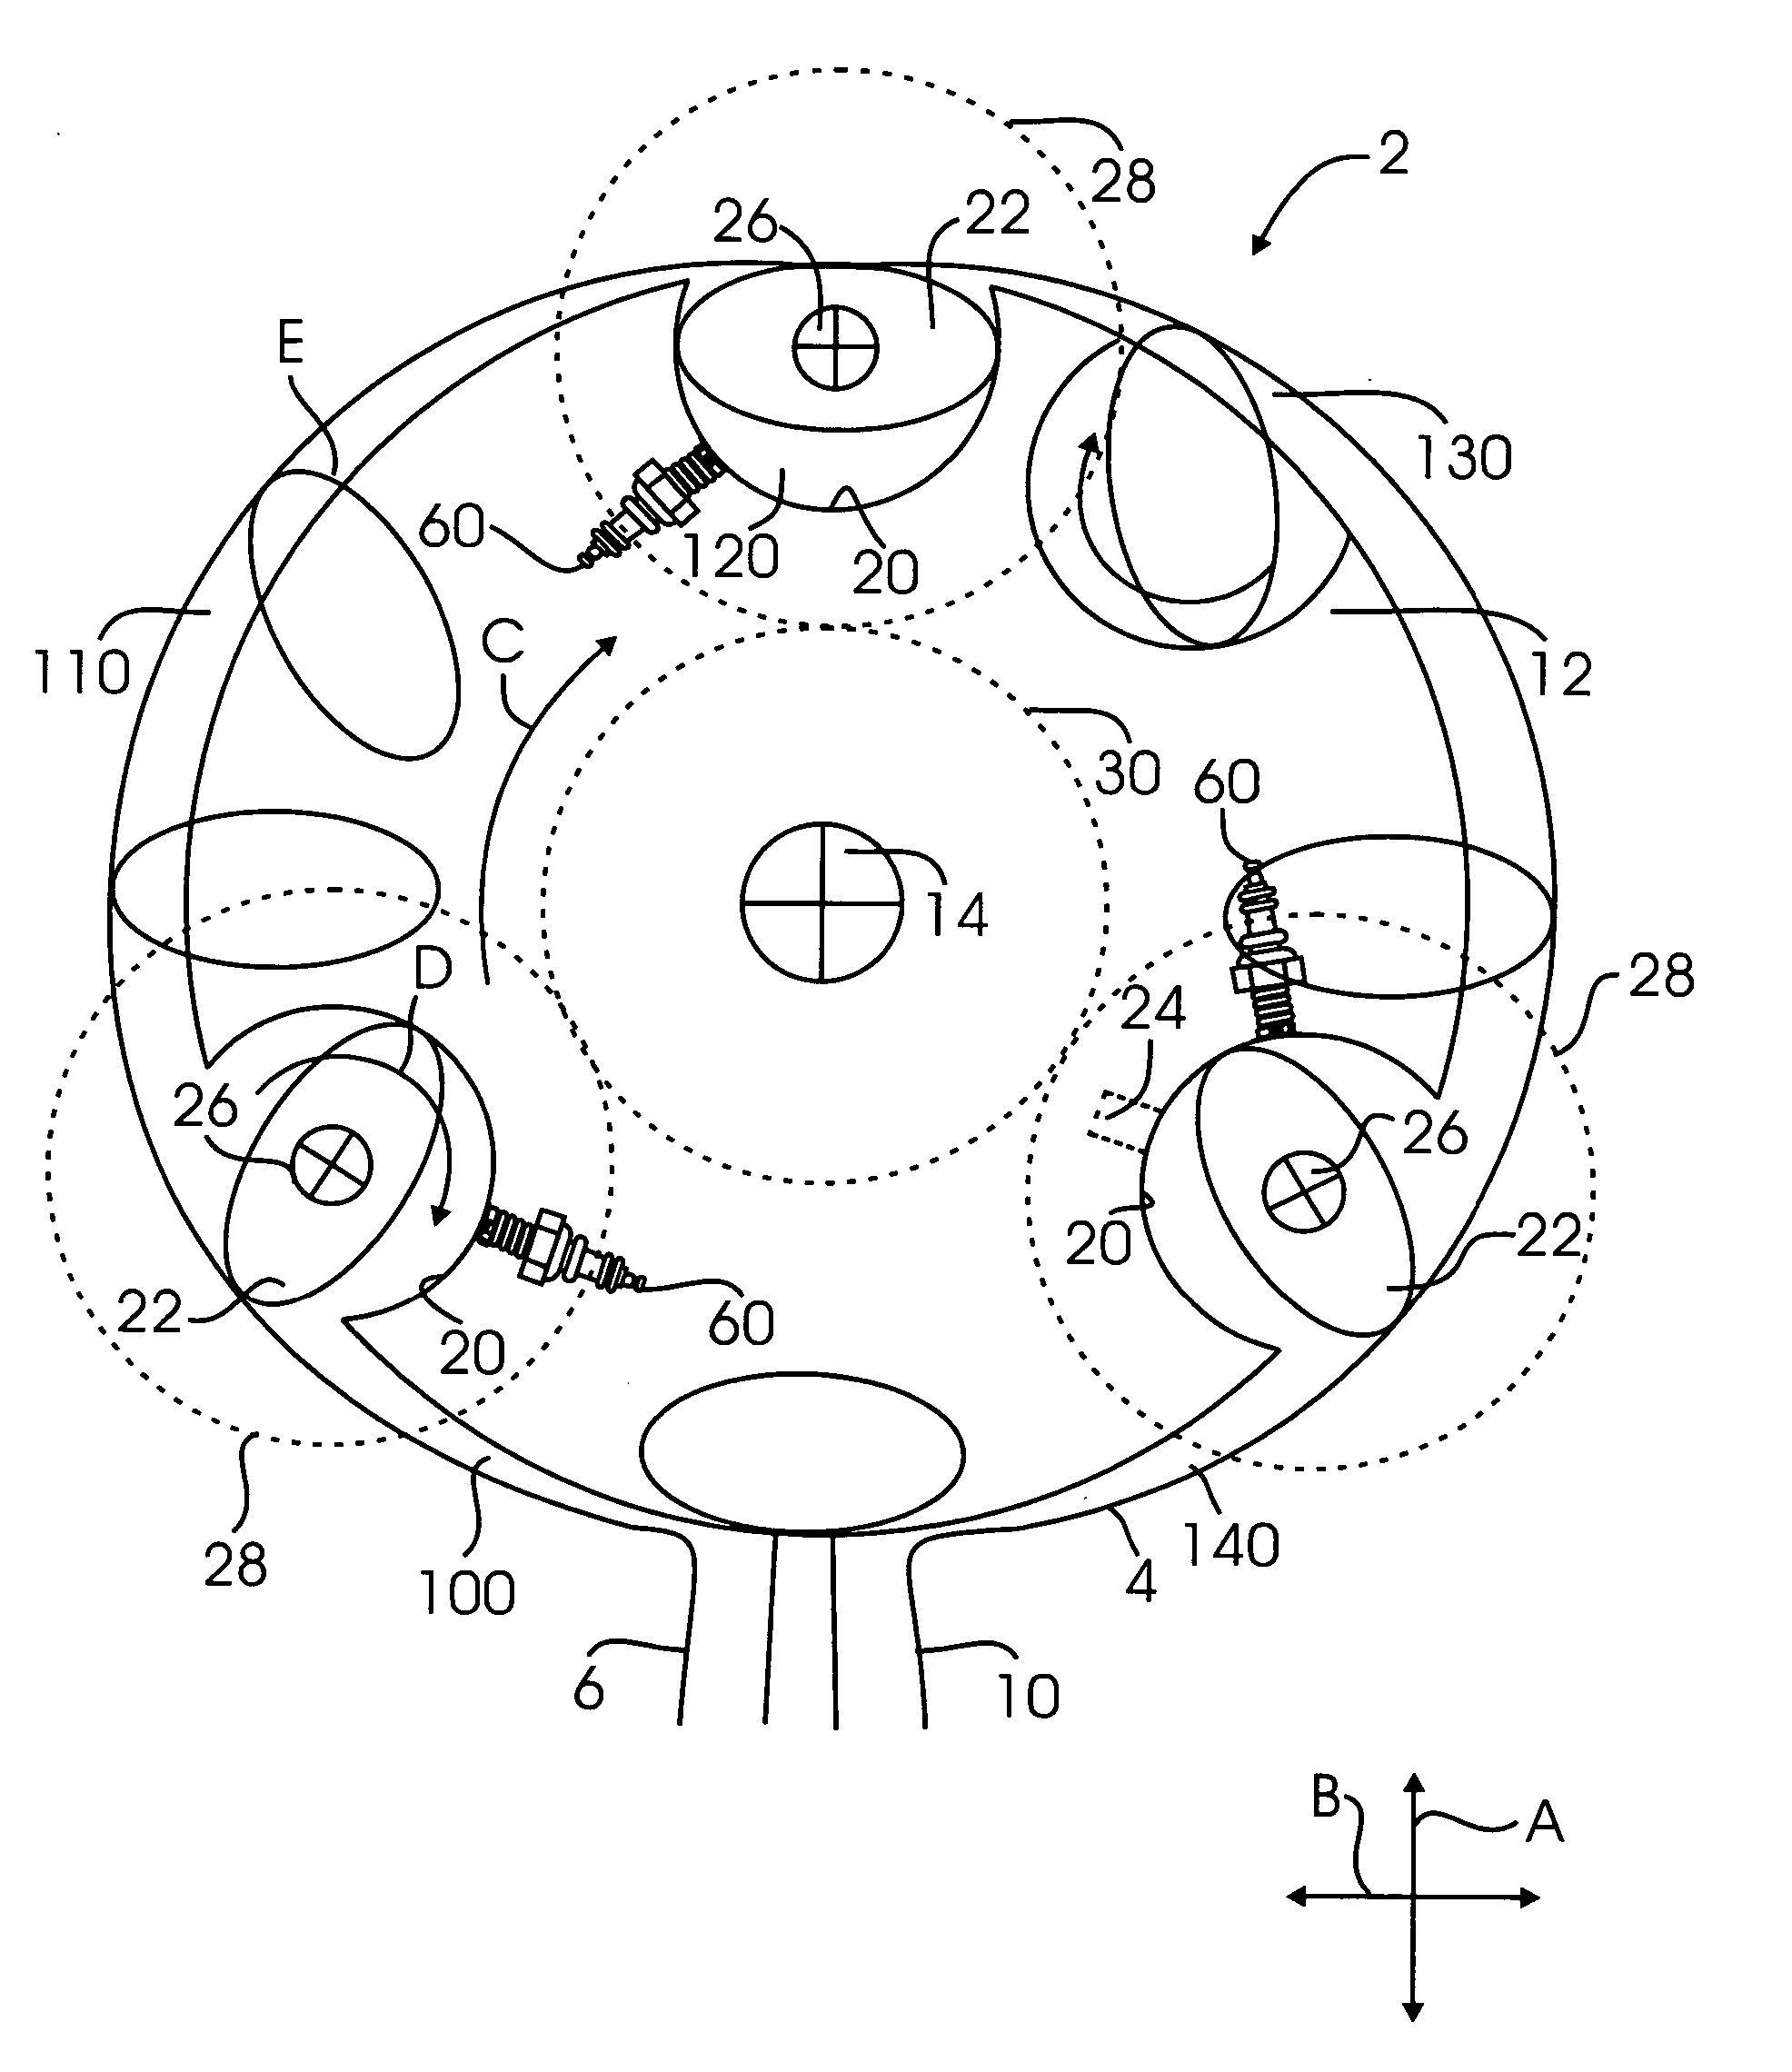 Concentric internal combustion rotary engine